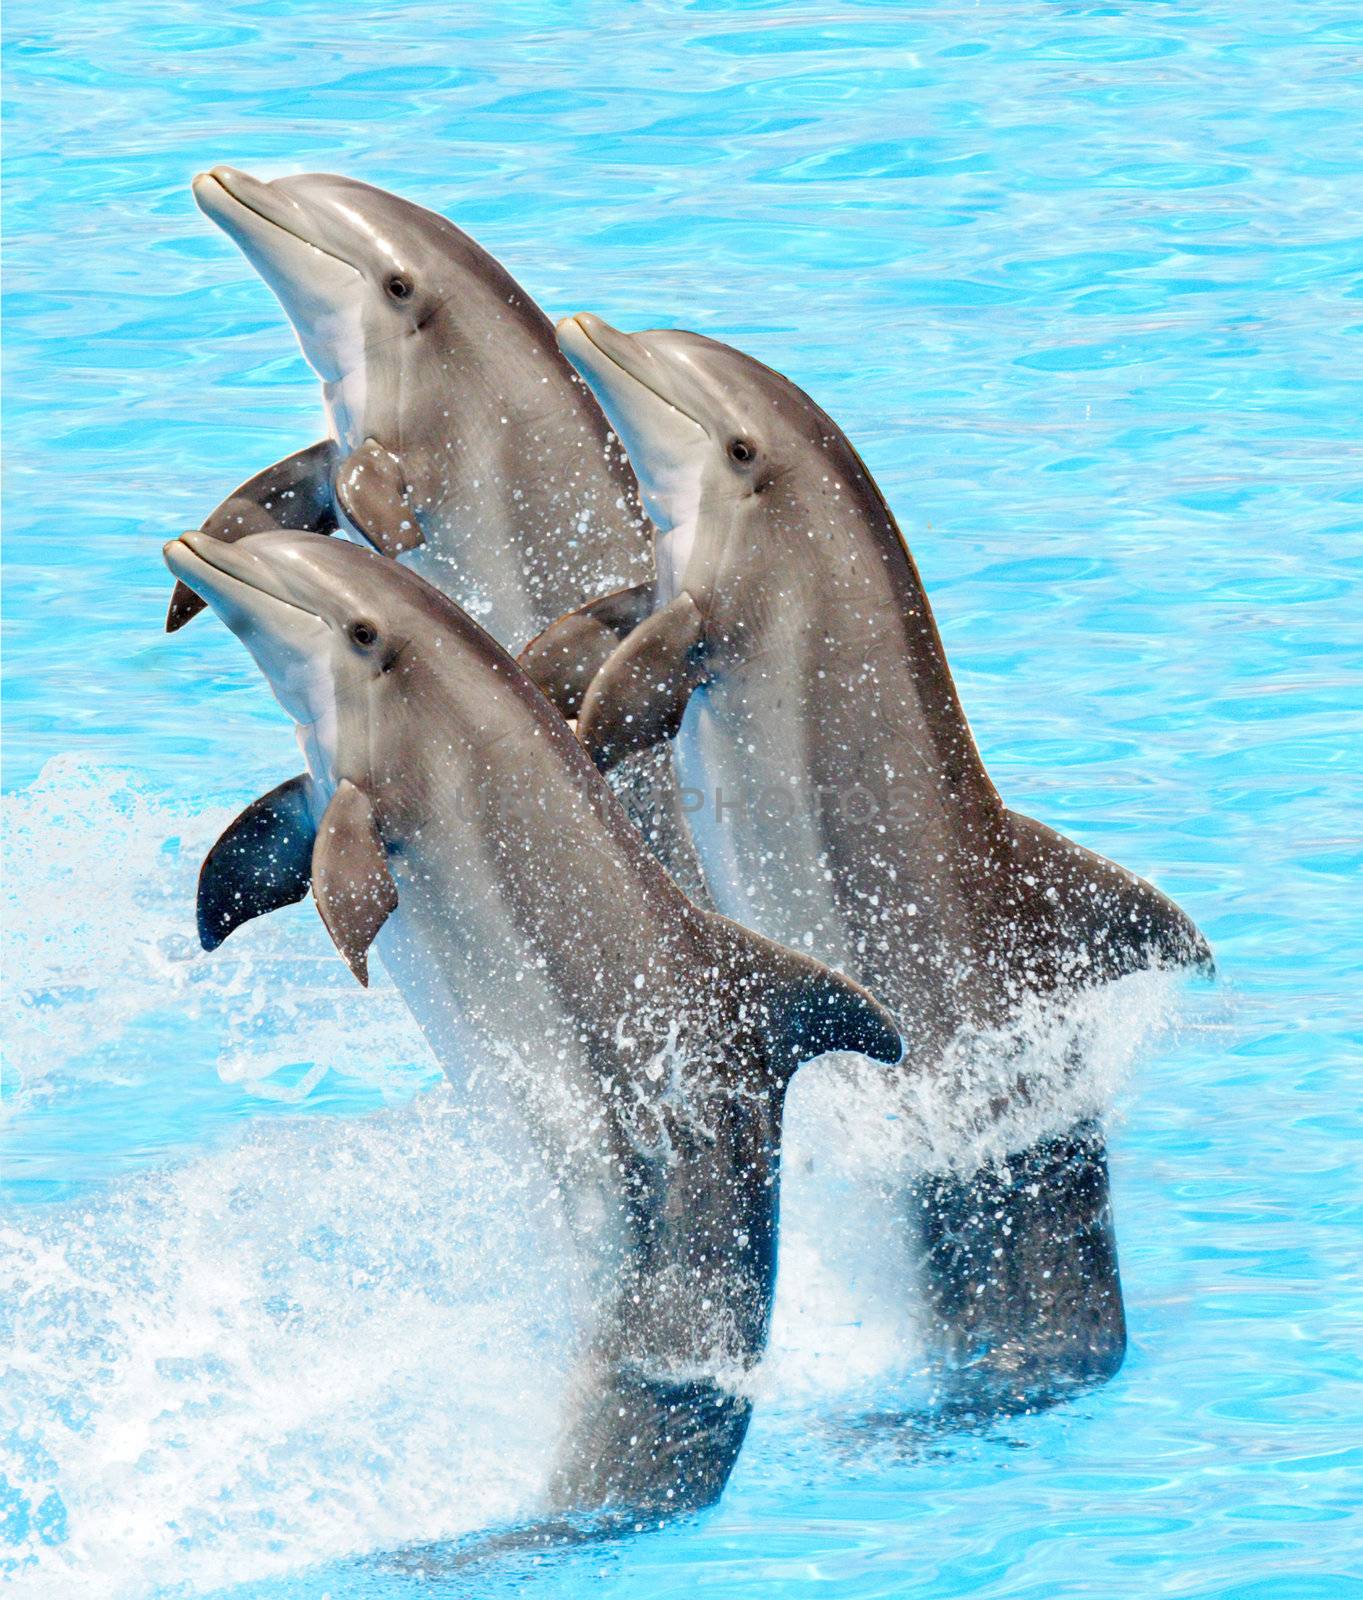 A group of bottlenose dolphins performing a tail stand